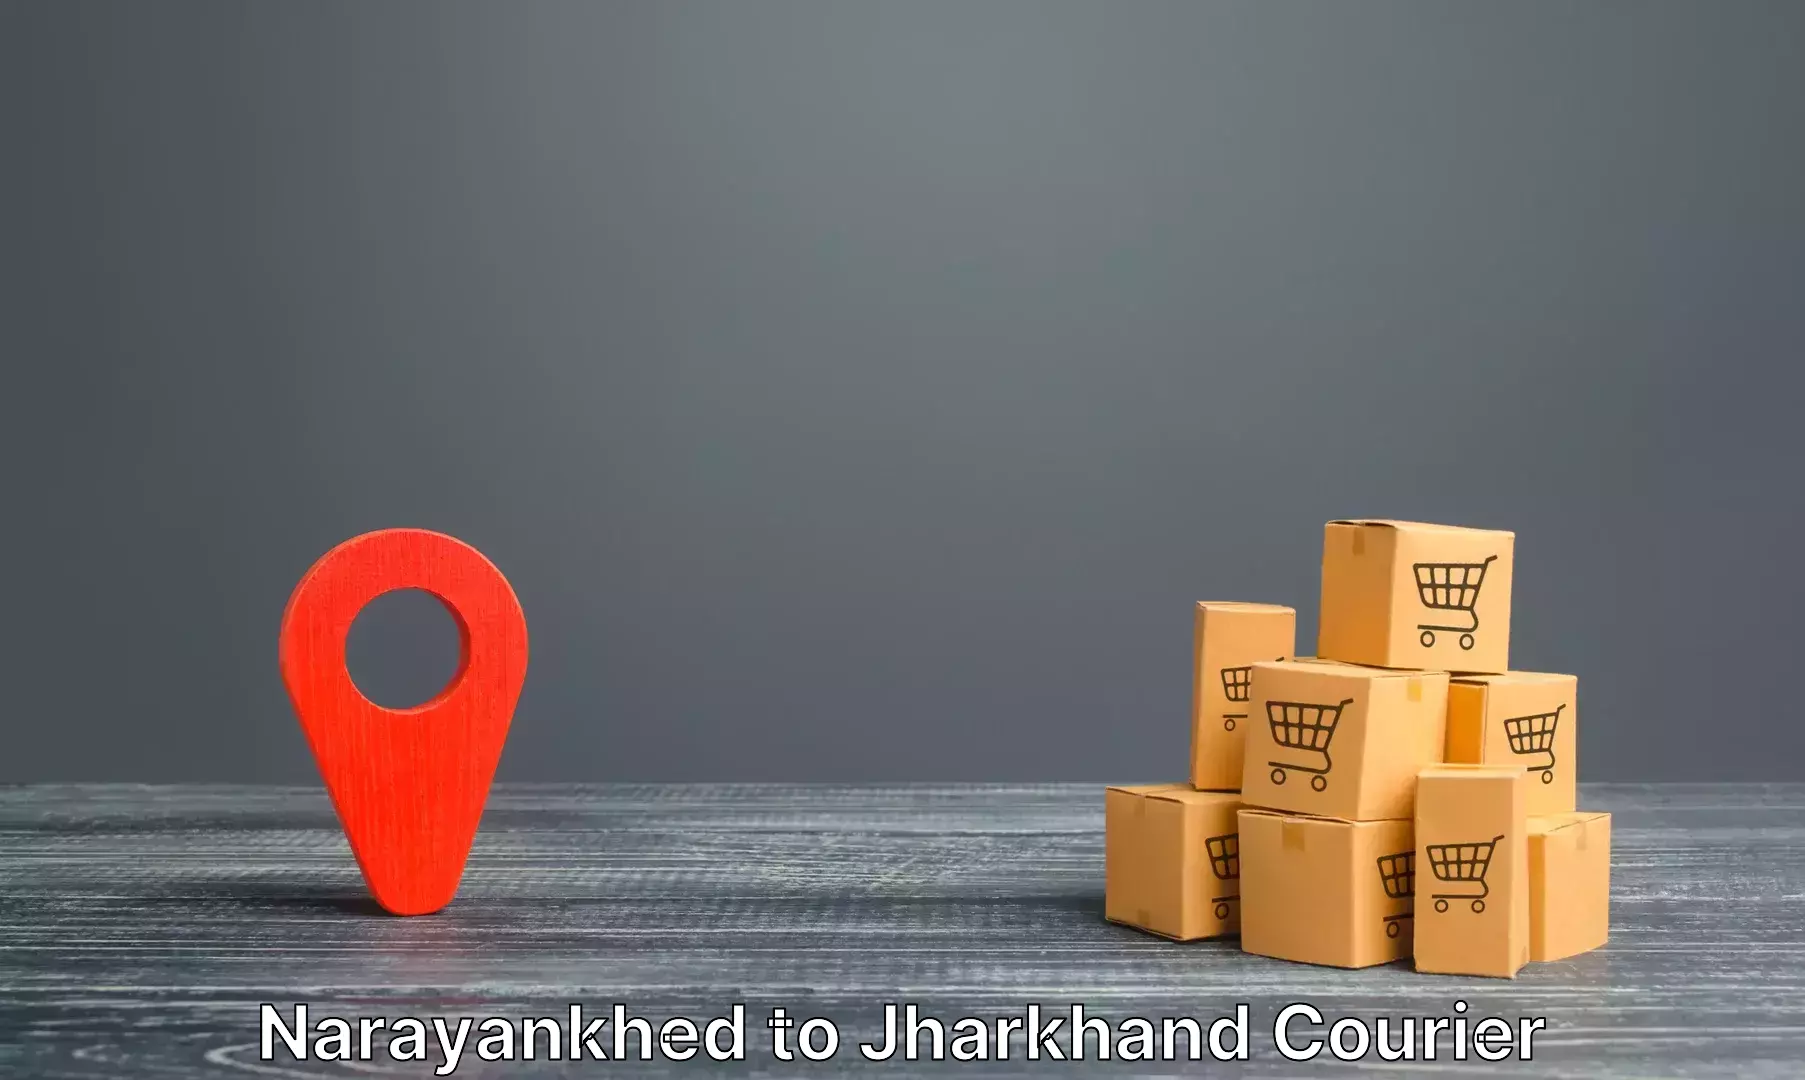 Luggage delivery app Narayankhed to Dhanbad